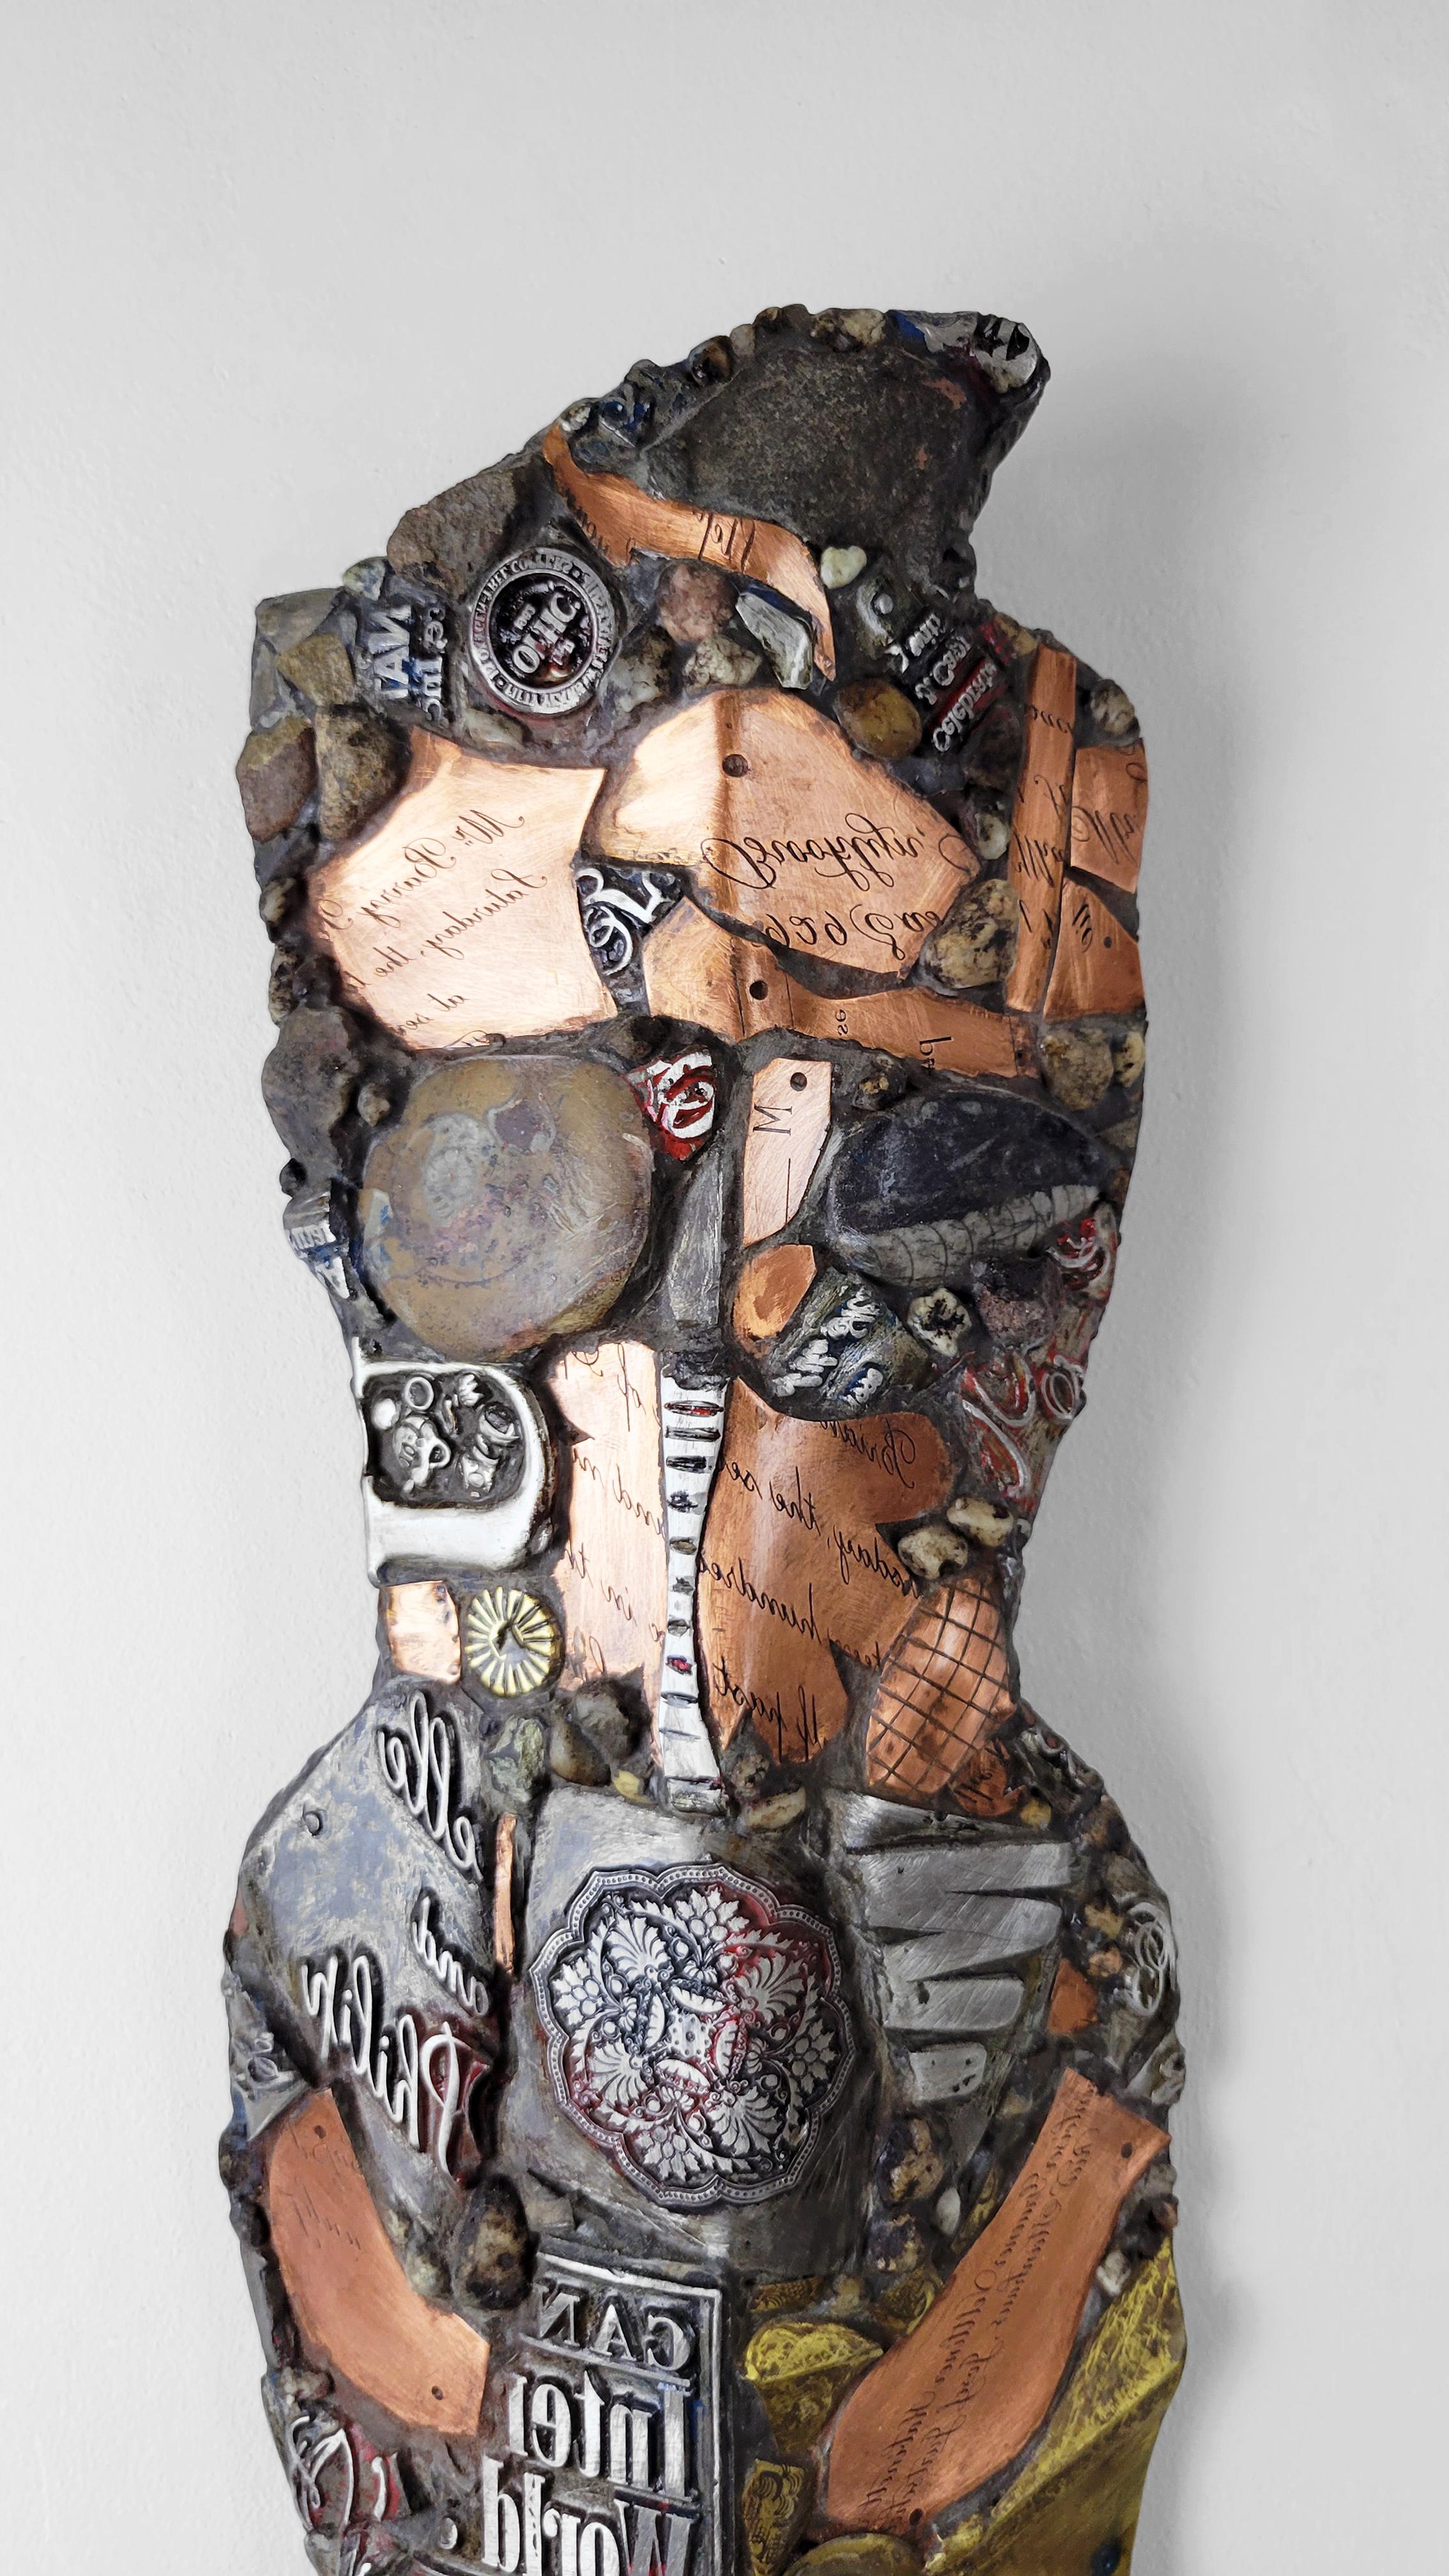 Heroic Vision 561 is from Linda Stein’s Knights of Protection series, which she started after being forced to evacuate her New York downtown studio for a year post-9/11.  Stein's Knights are shield-like forms made of mixed media that hang on the